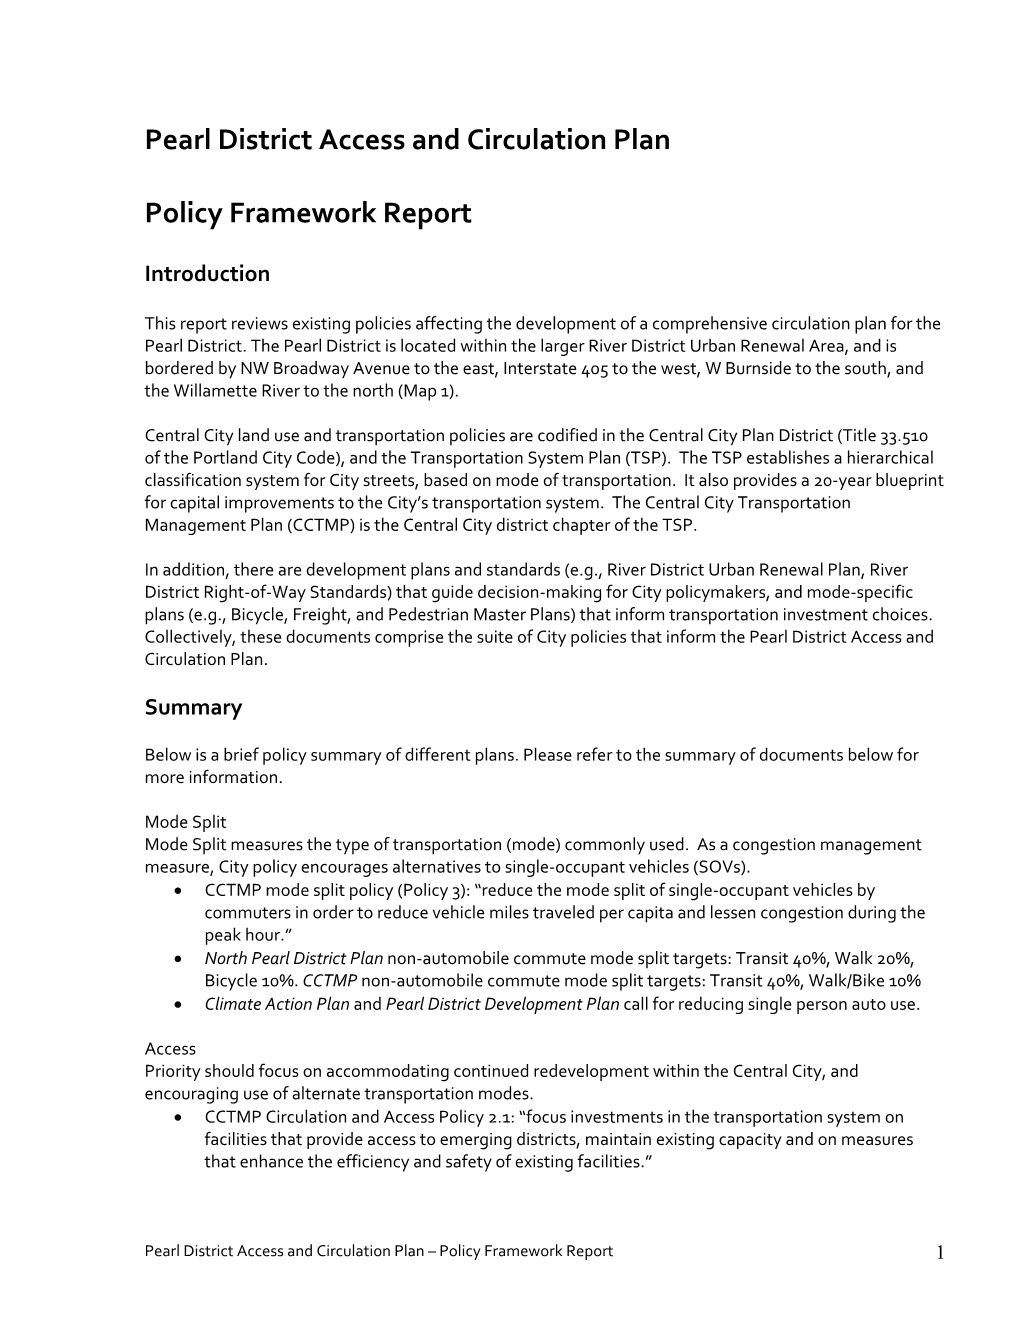 Pearl District Policy Framework Report